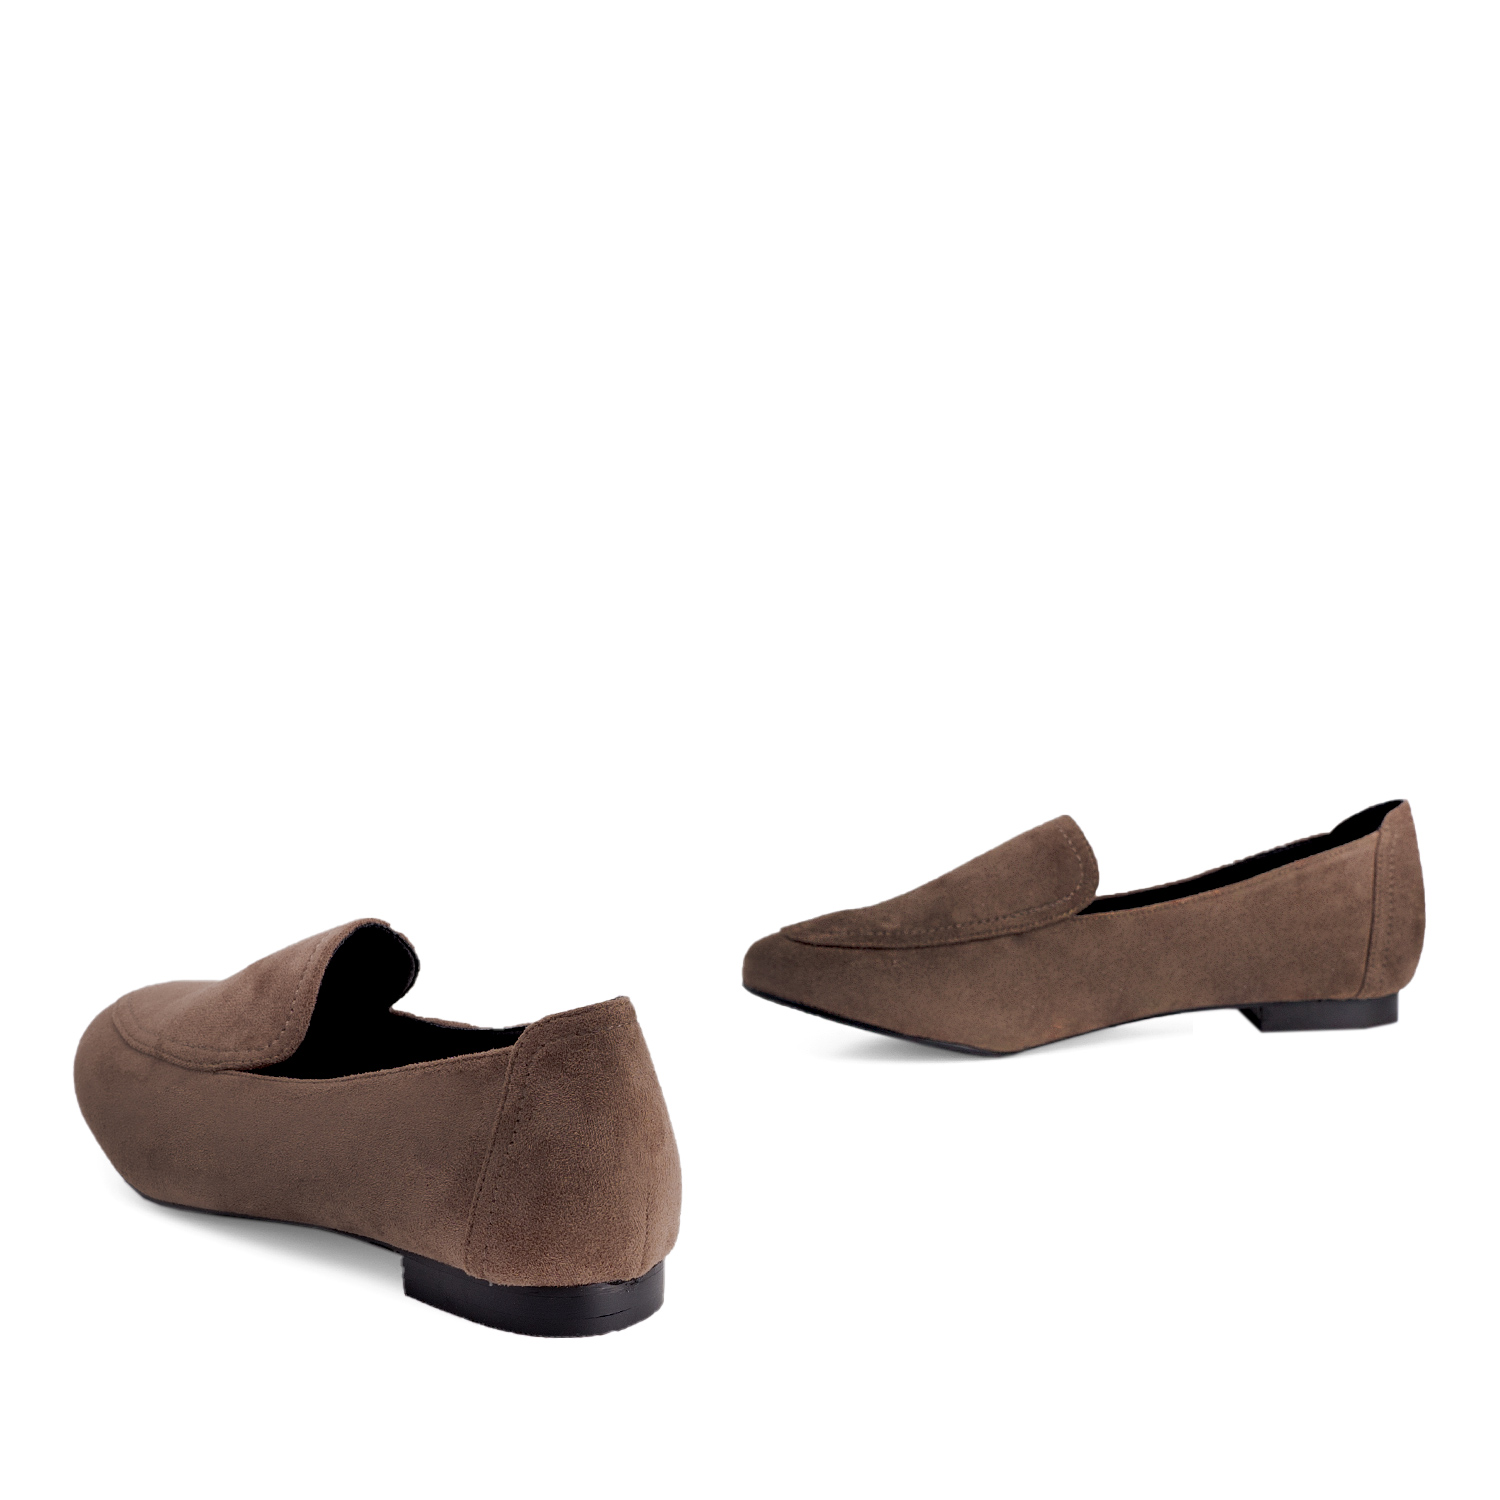 Moccasins in light brown faux suede 